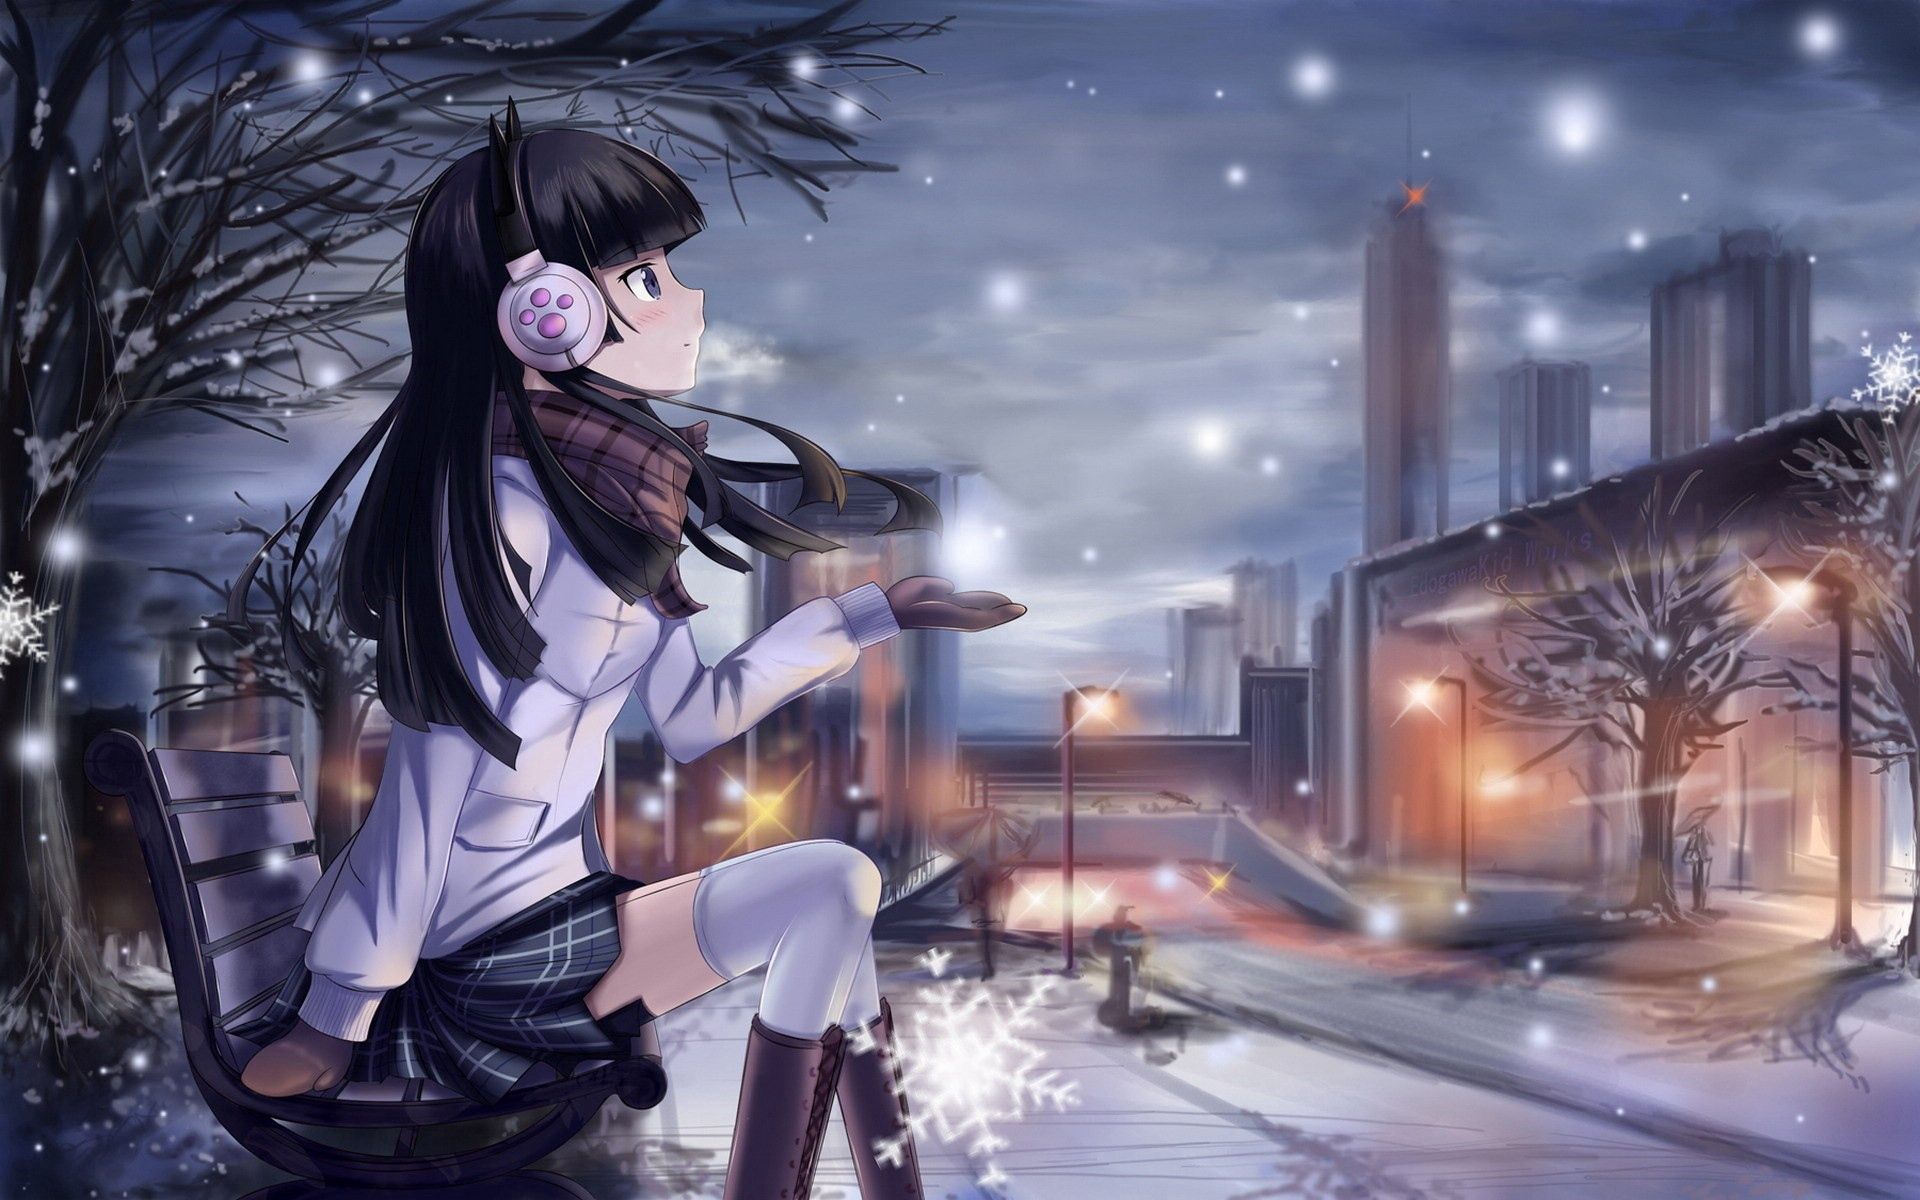 bench, anime, girl, winter, headphones, city, lamp, lantern, cold, snowflake, scarf cell phone wallpapers